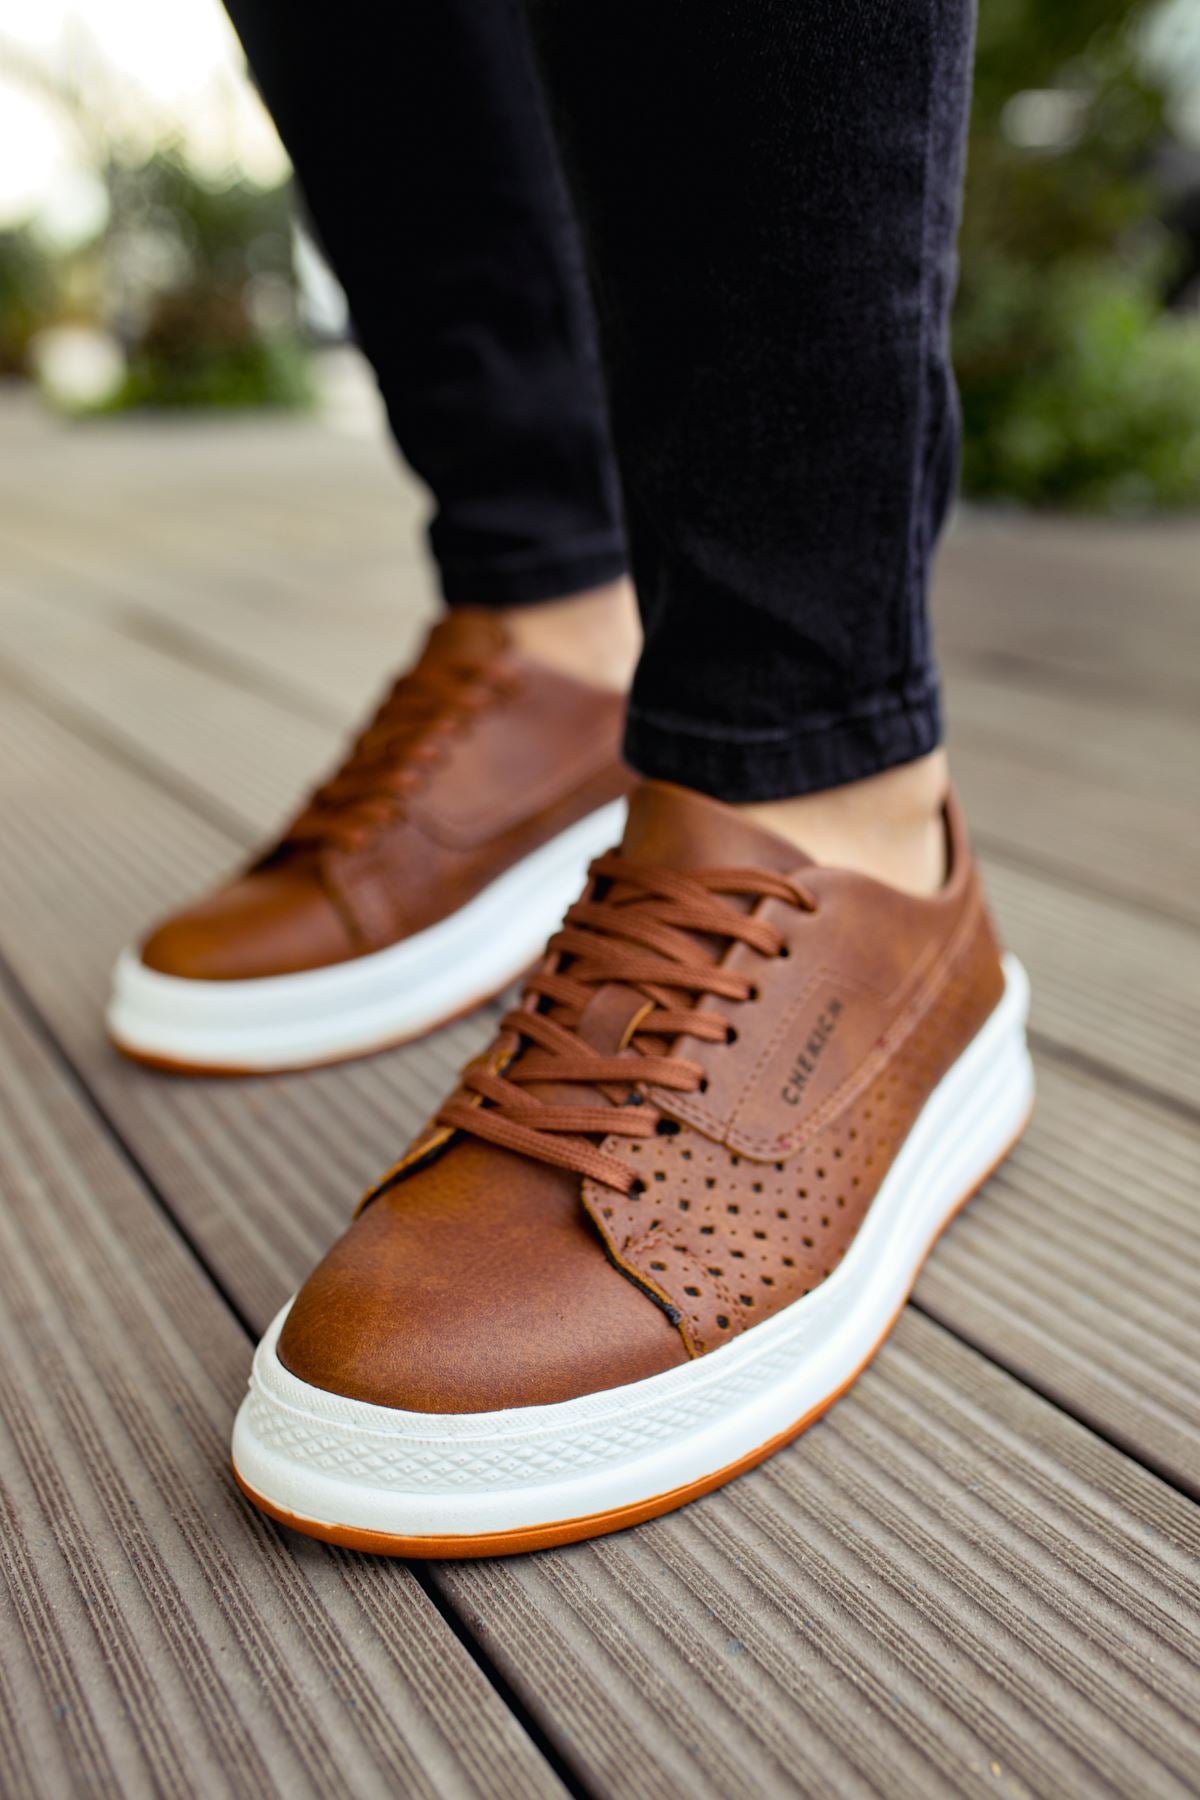 CH043 Men's Unisex Brown-White Sole Casual Shoes - STREETMODE ™